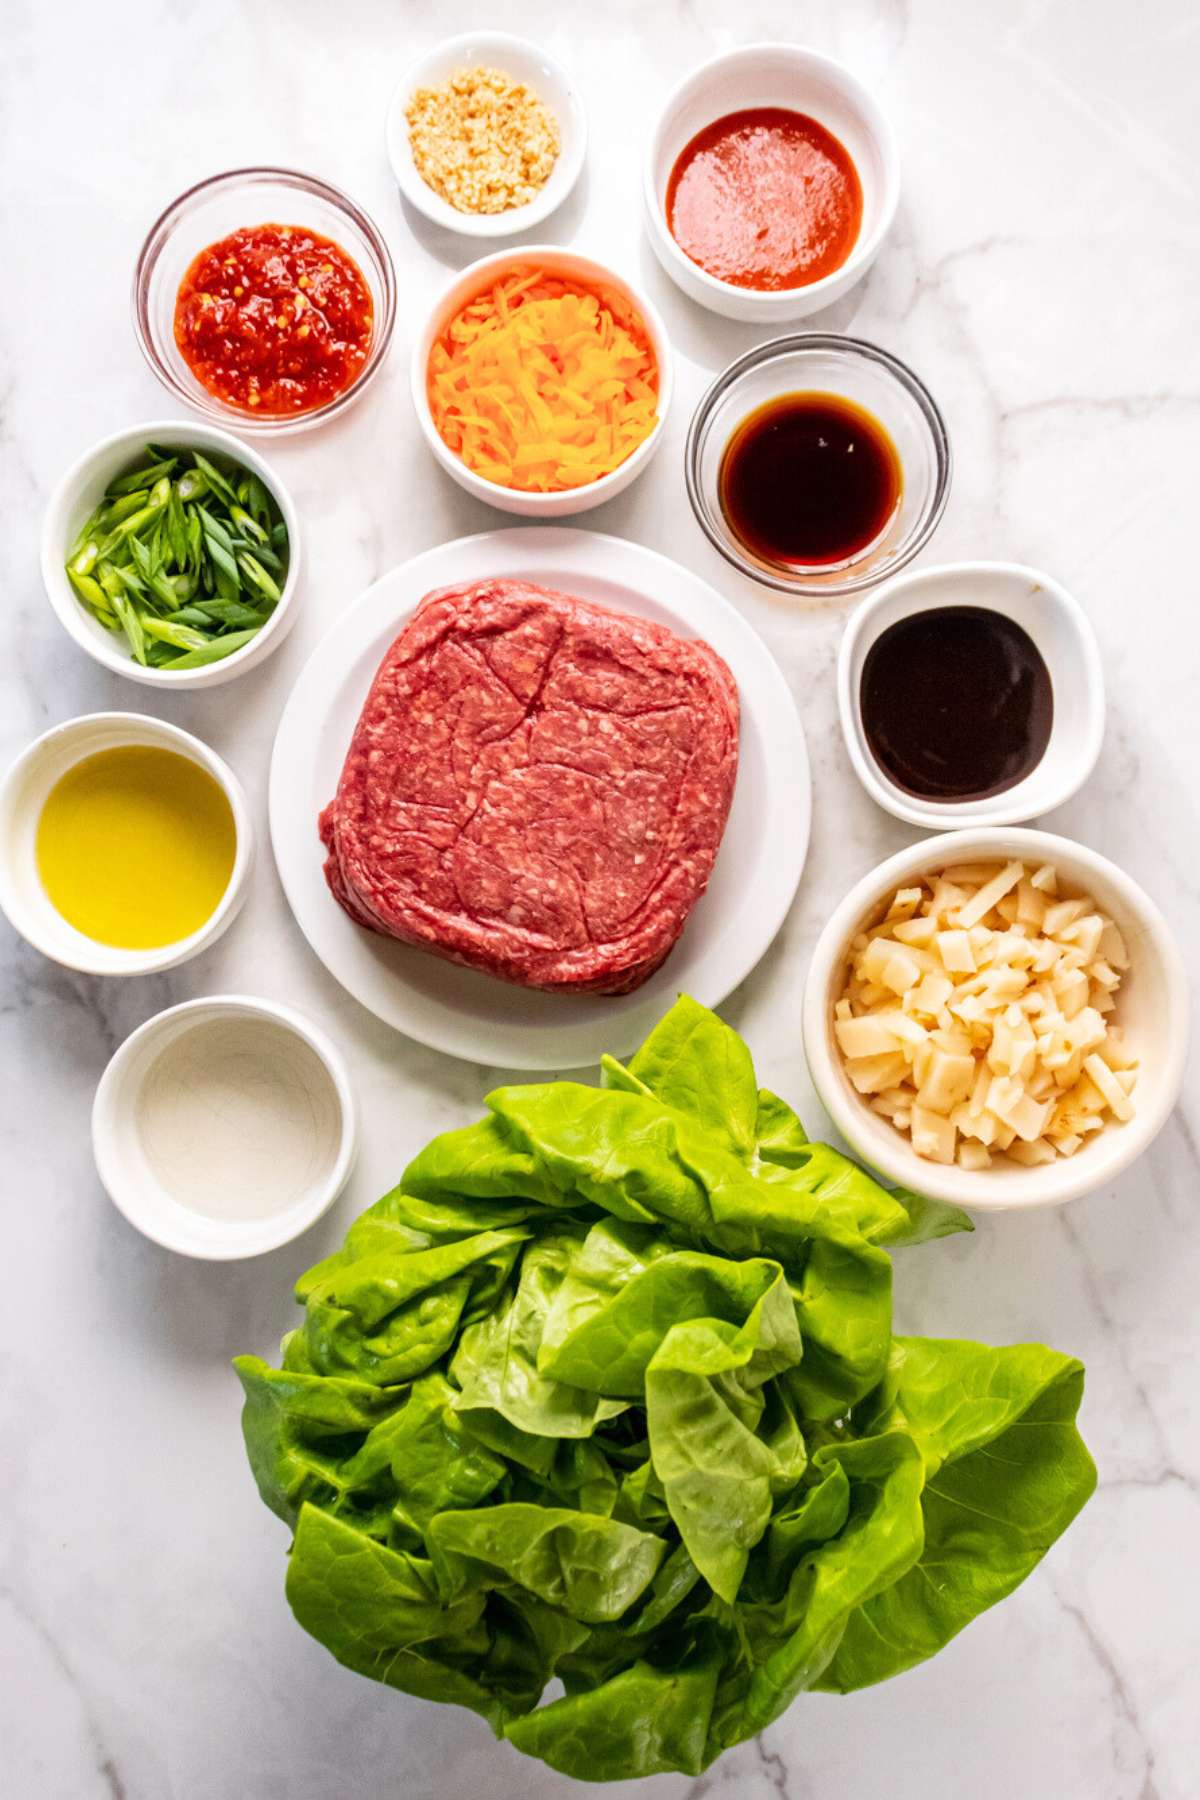 Ingredients in bowls with ground beef on a white plate to make ground beef lettuce wraps.